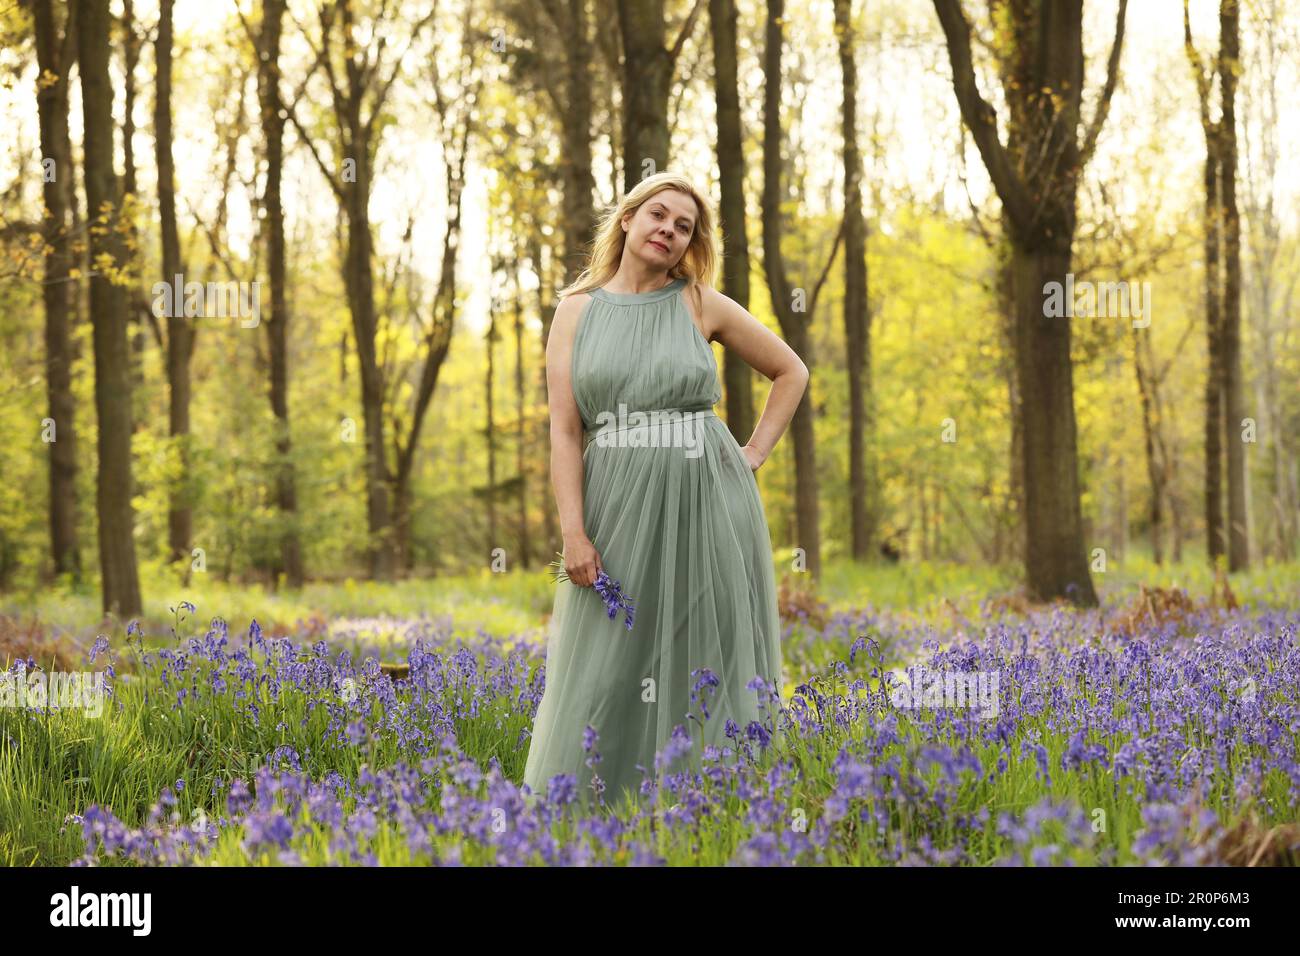 A woman standing in a bluebell wood wearing a long green dress Stock Photo